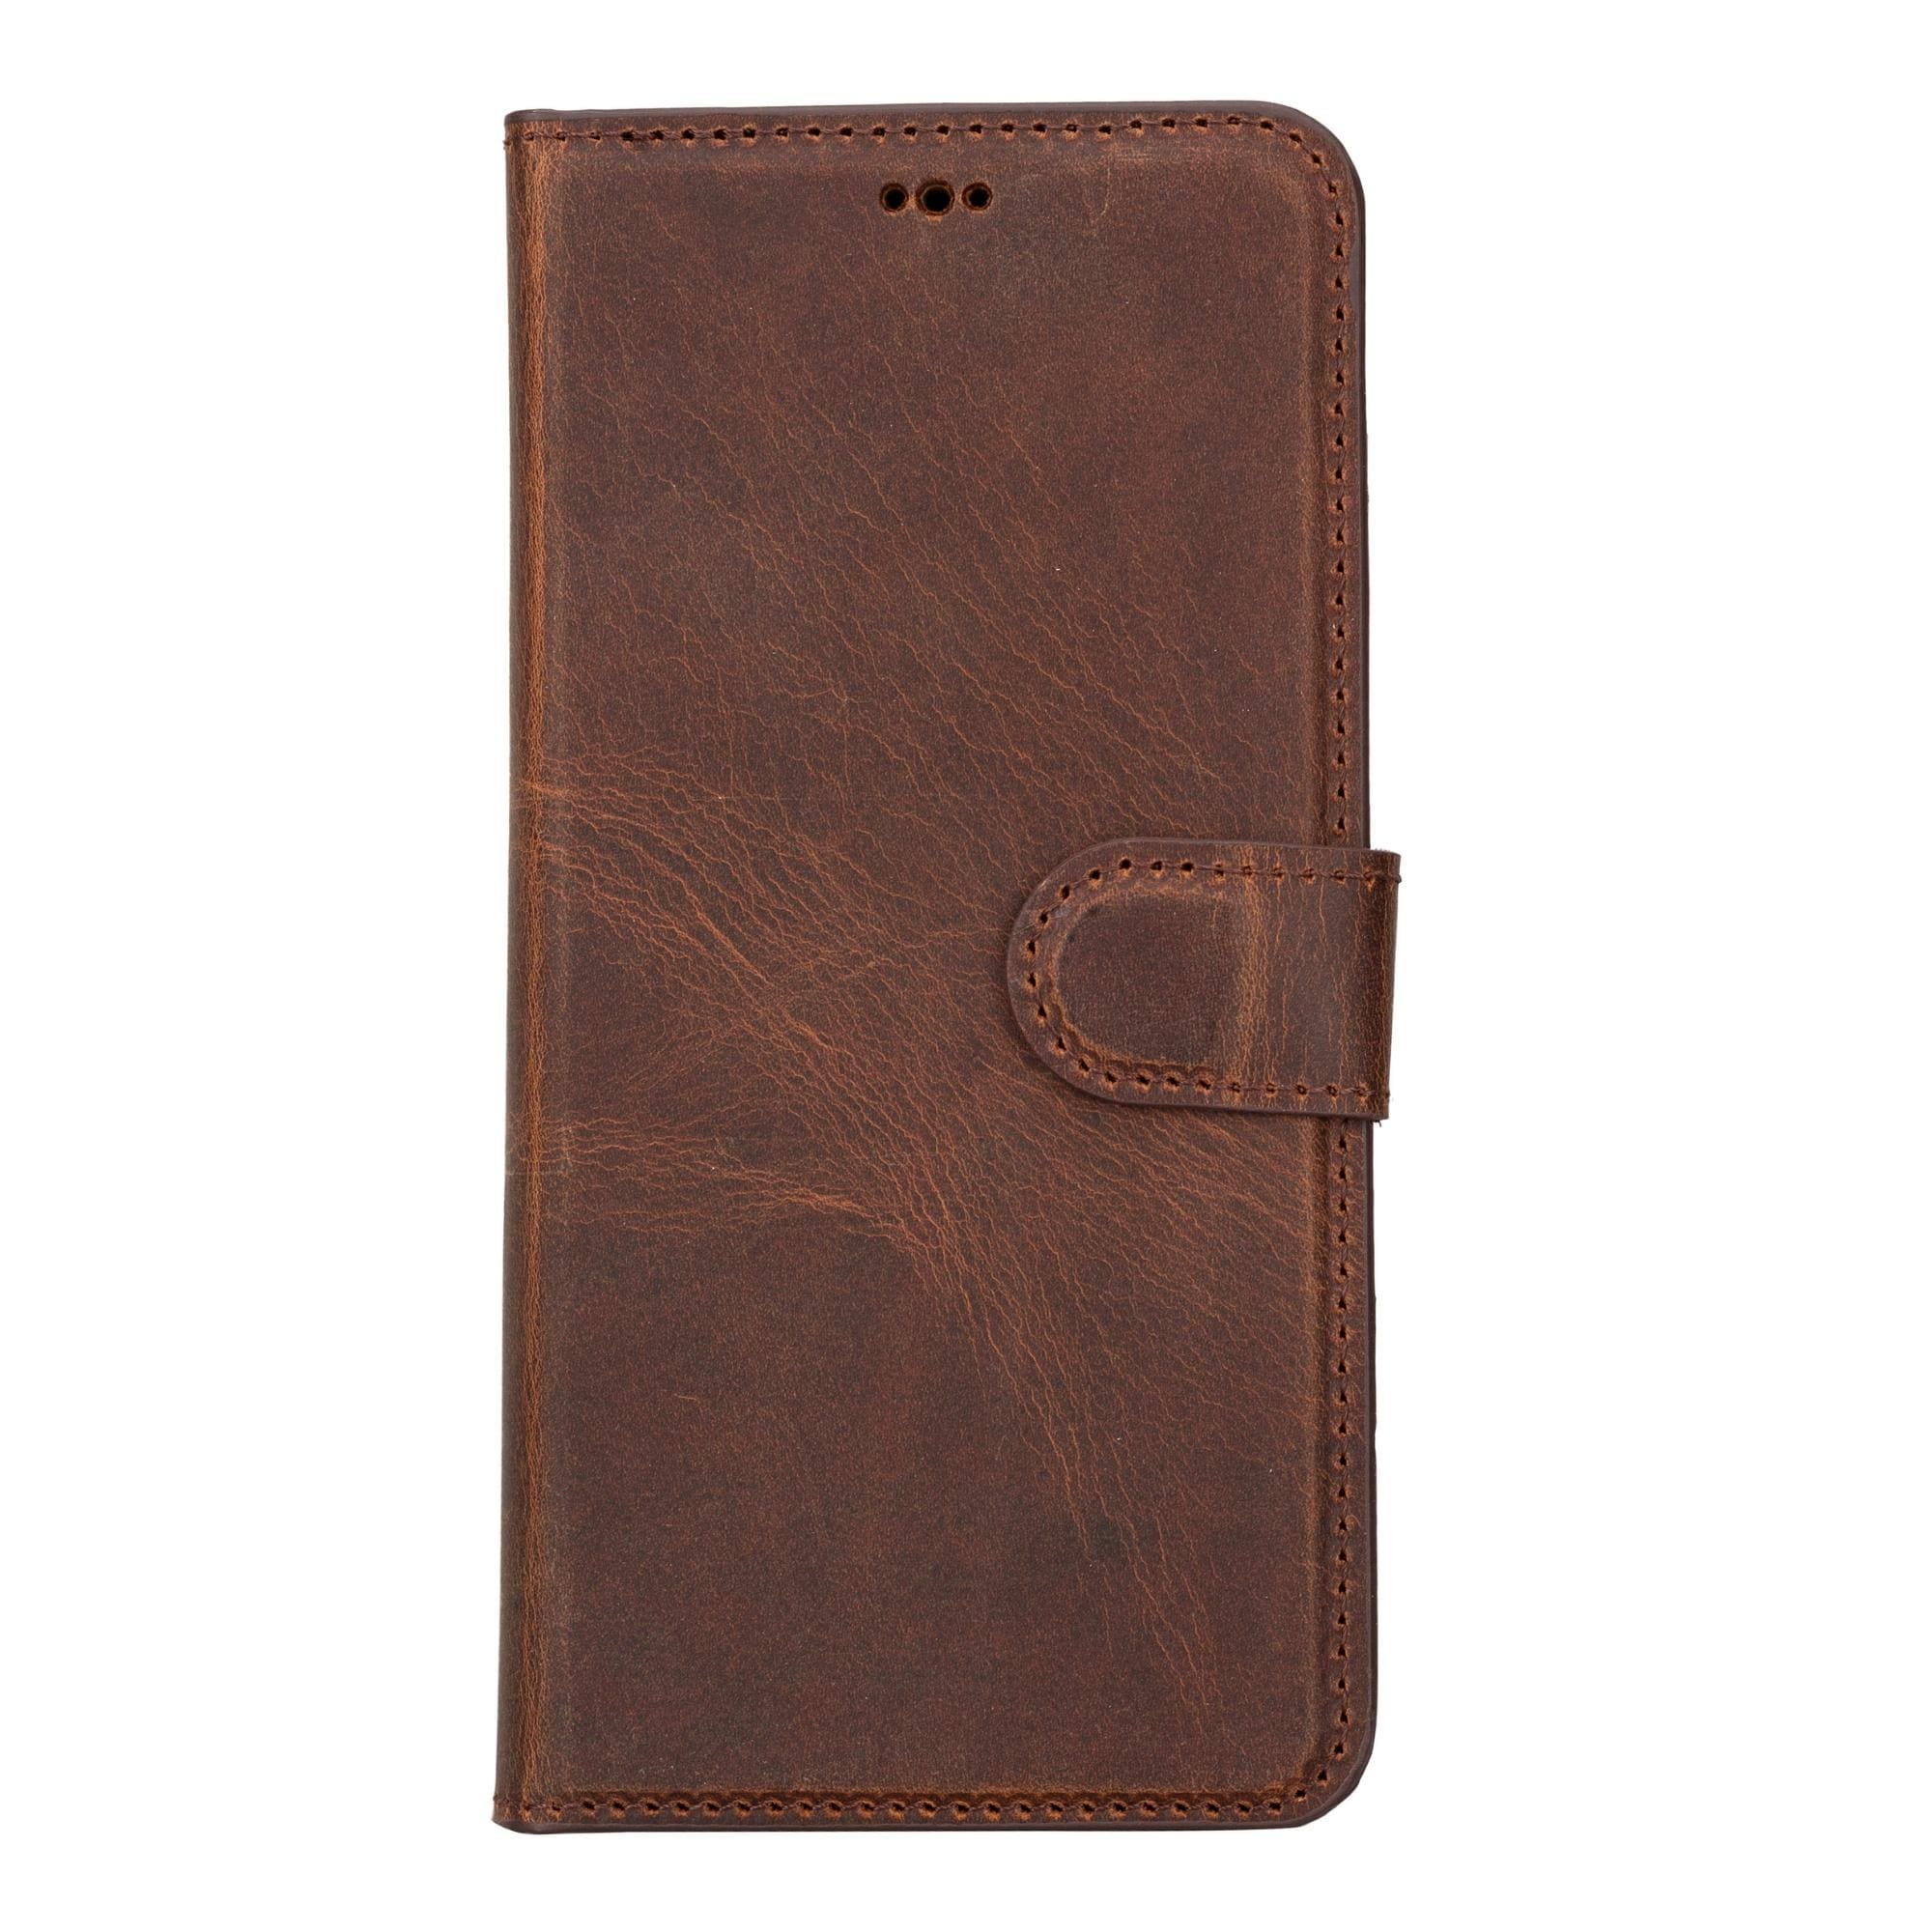 Samsung Galaxy S23 Series Leather Wallet Cases - Mw, Galaxy S23 / Tan